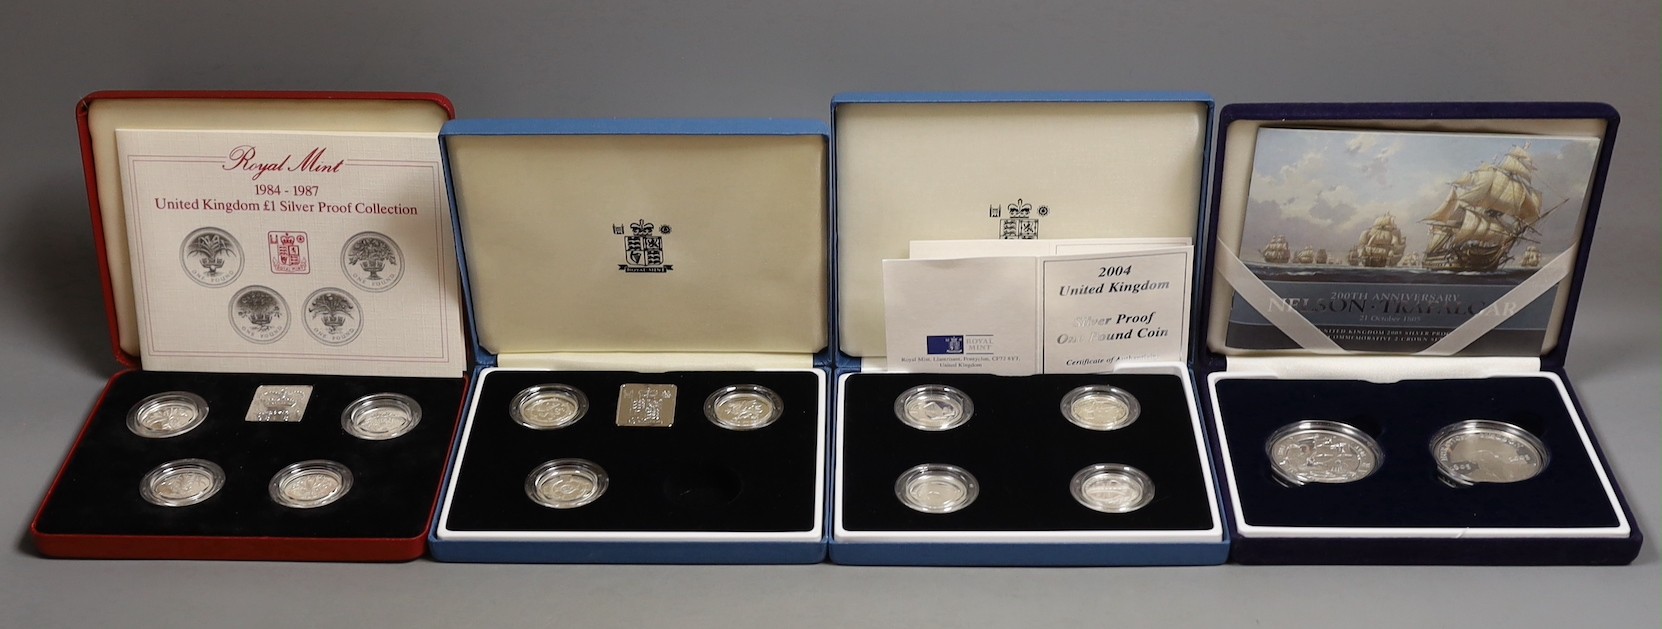 Three cased Royal Mint UK silver proof £1 coin collections 1984-87, 1994-96, 2004-07 and a 200th